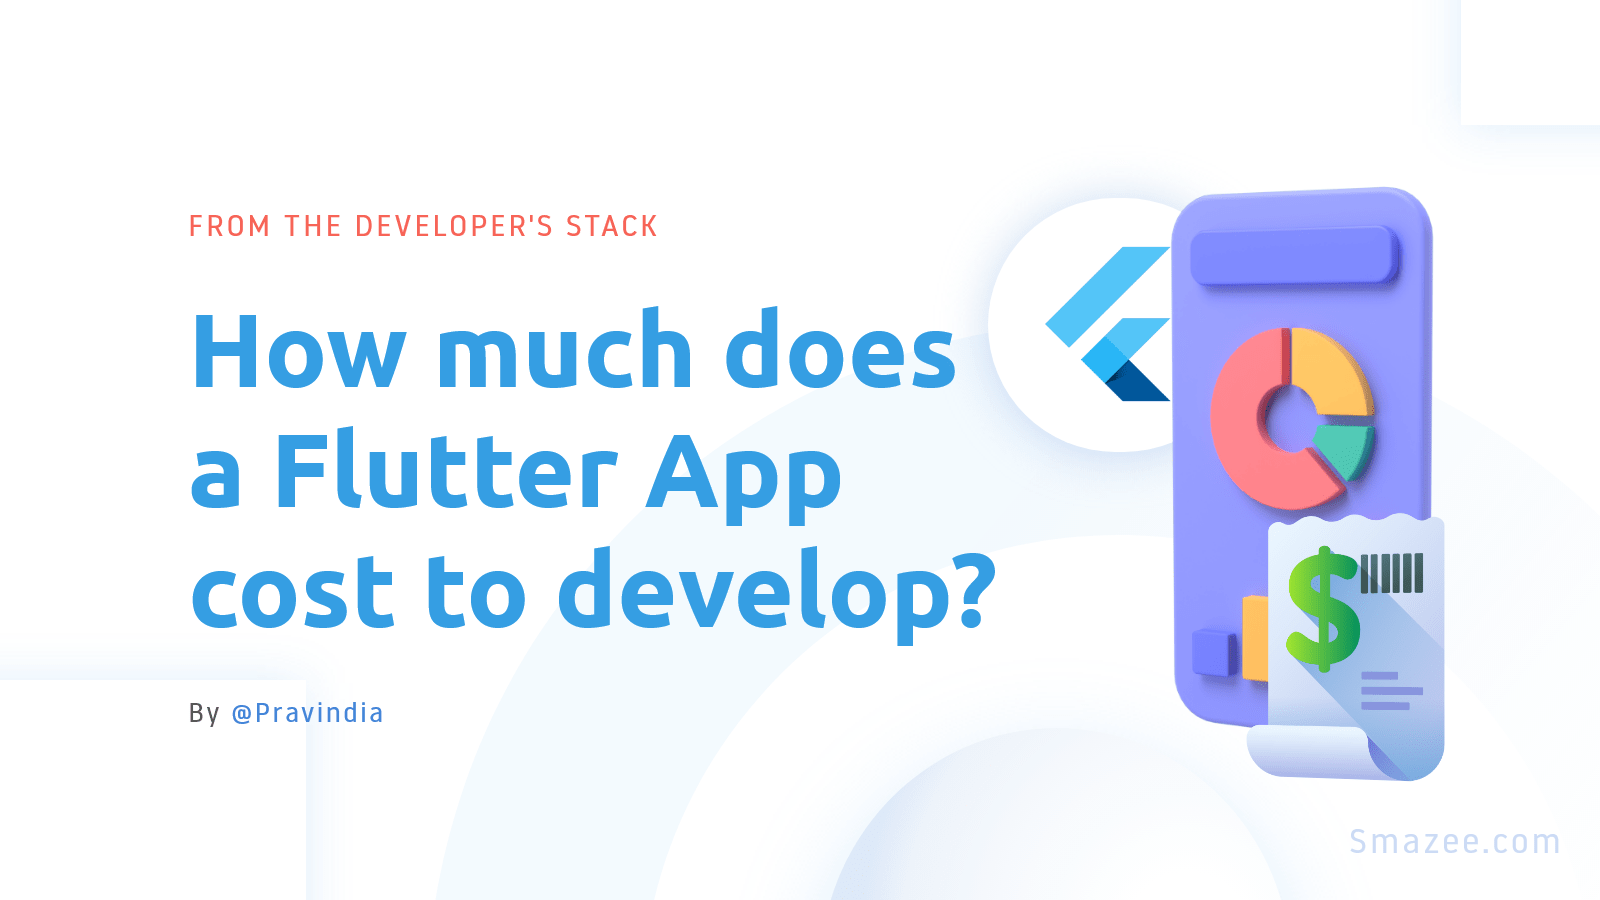 How much does a basic Flutter App development cost?